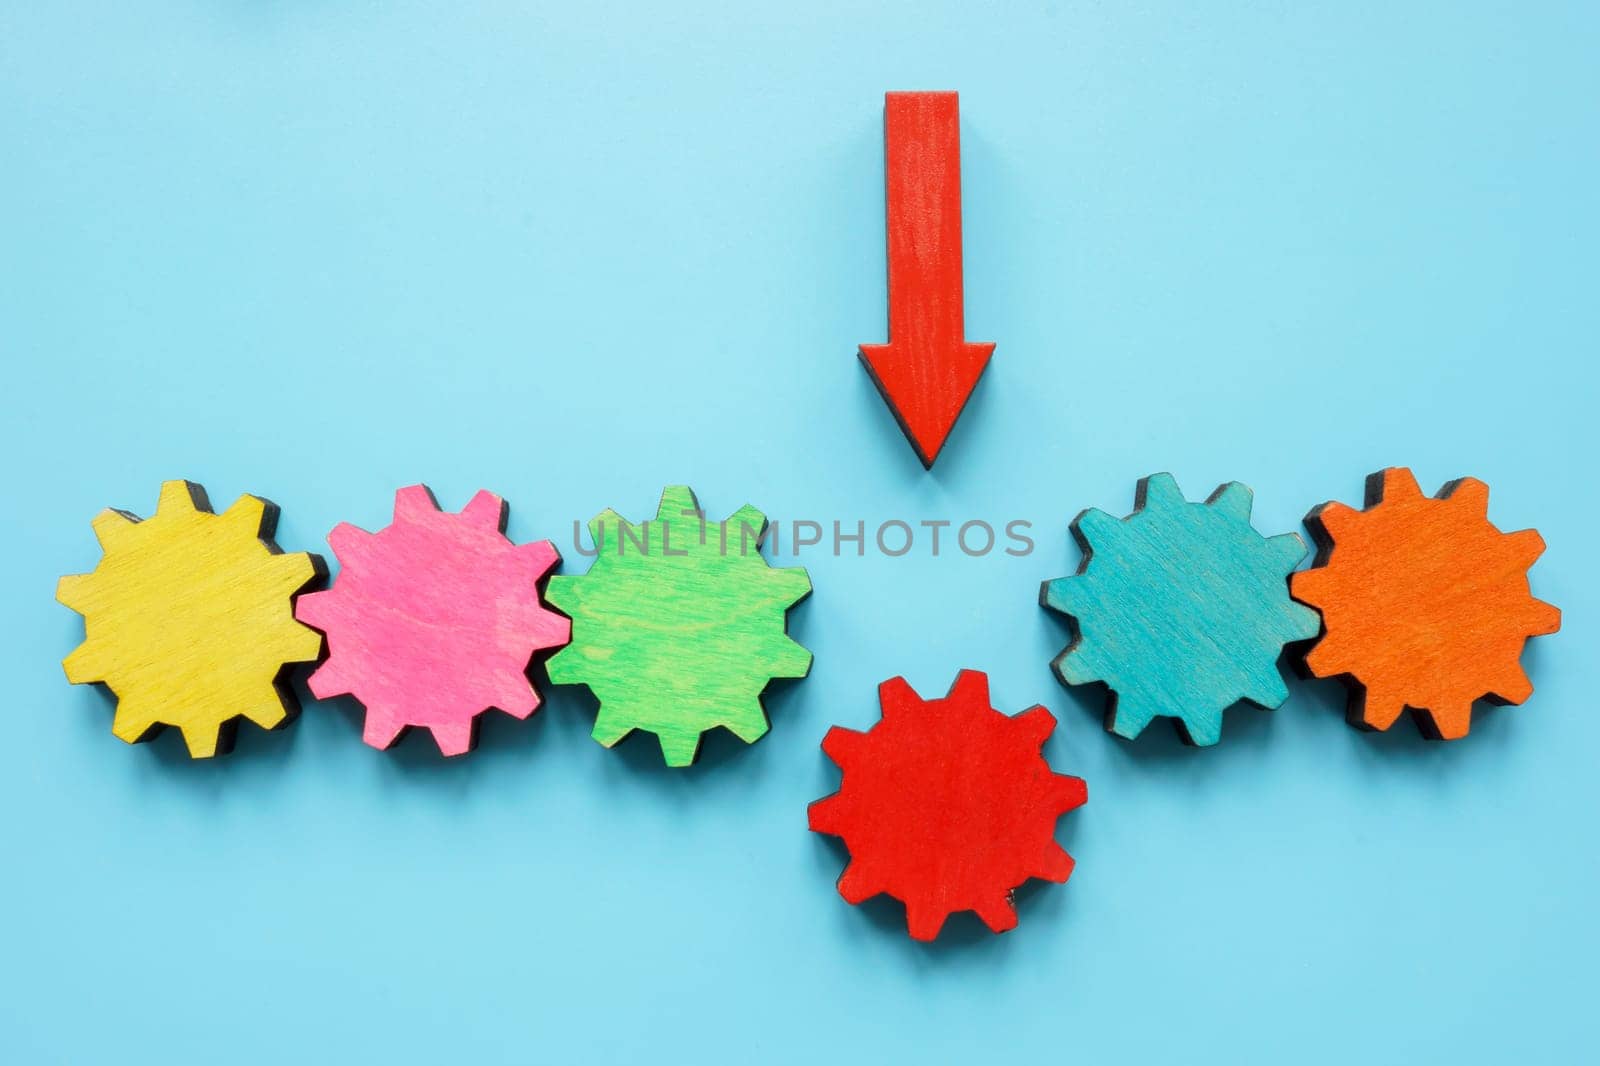 Colored gears as symbol of teamwork and the weak link.